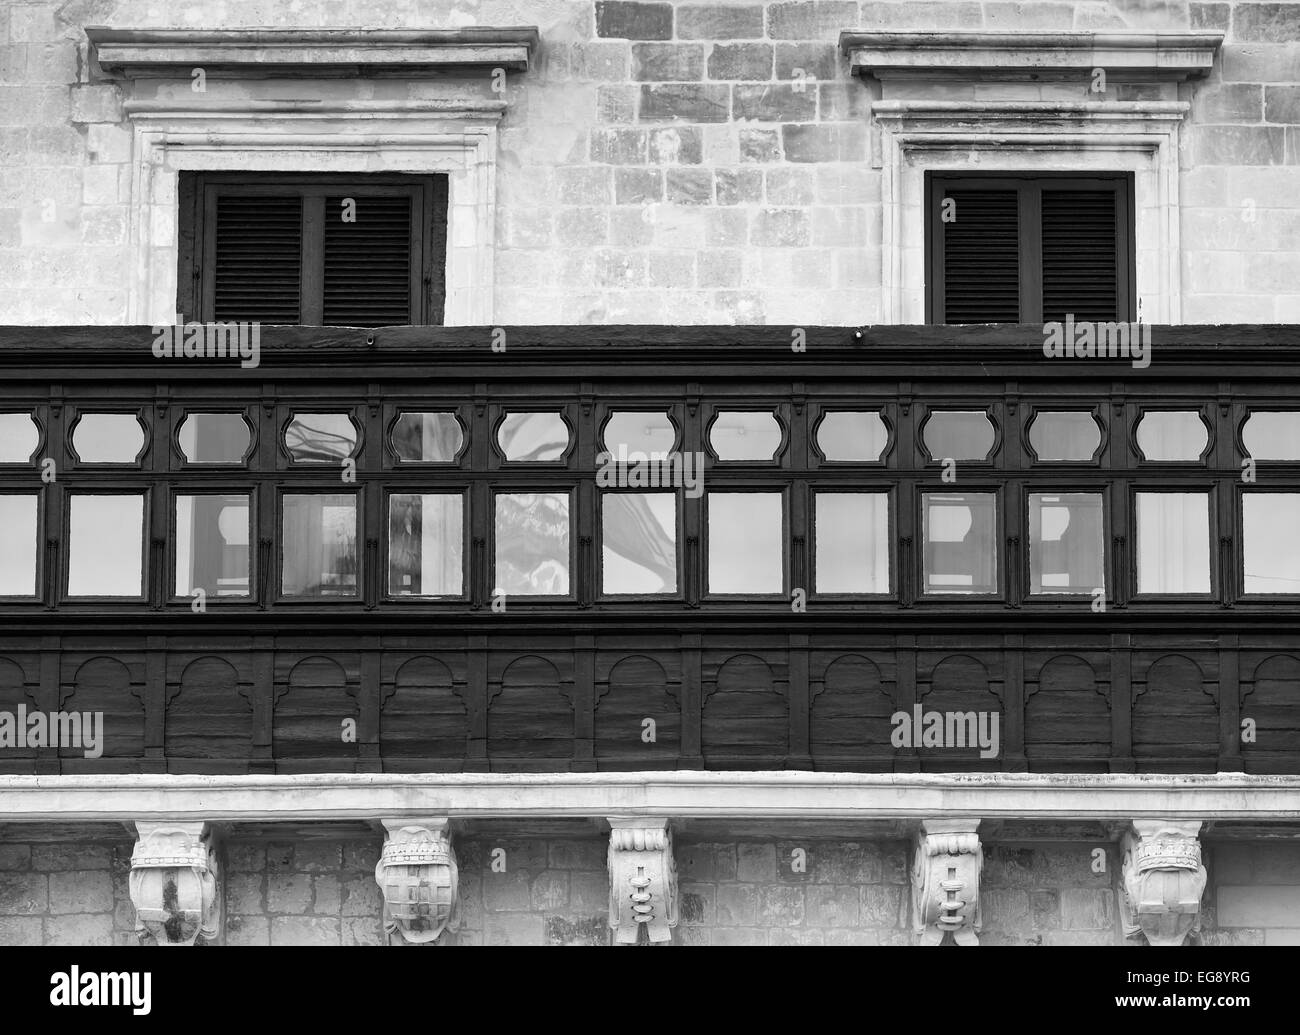 The wooden enclosed balcony of the Grandmaster's Palace in Valletta, Malta. Stock Photo